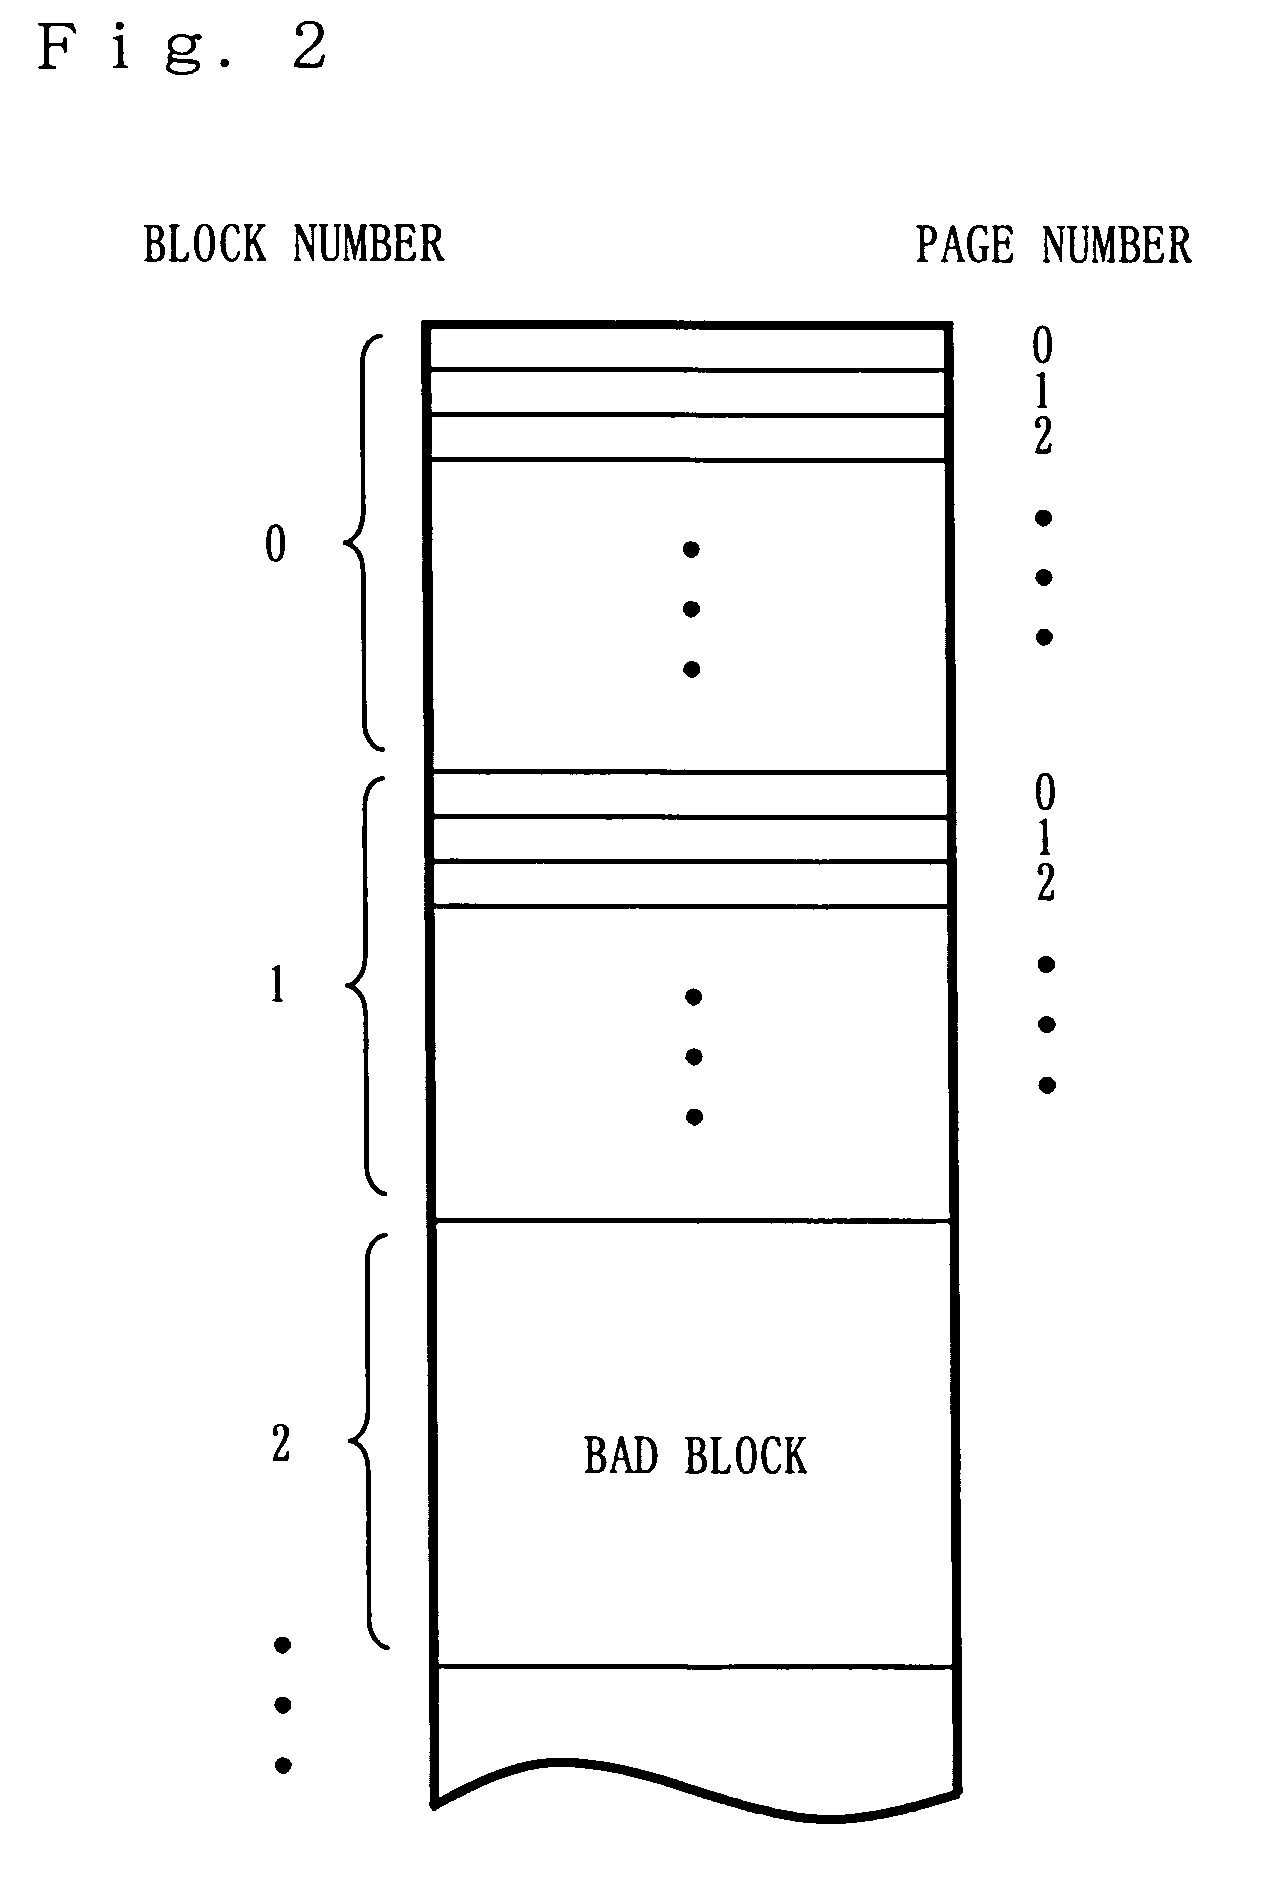 Information processing apparatus for performing a system boot by using programs stored in a non-voltile storage device